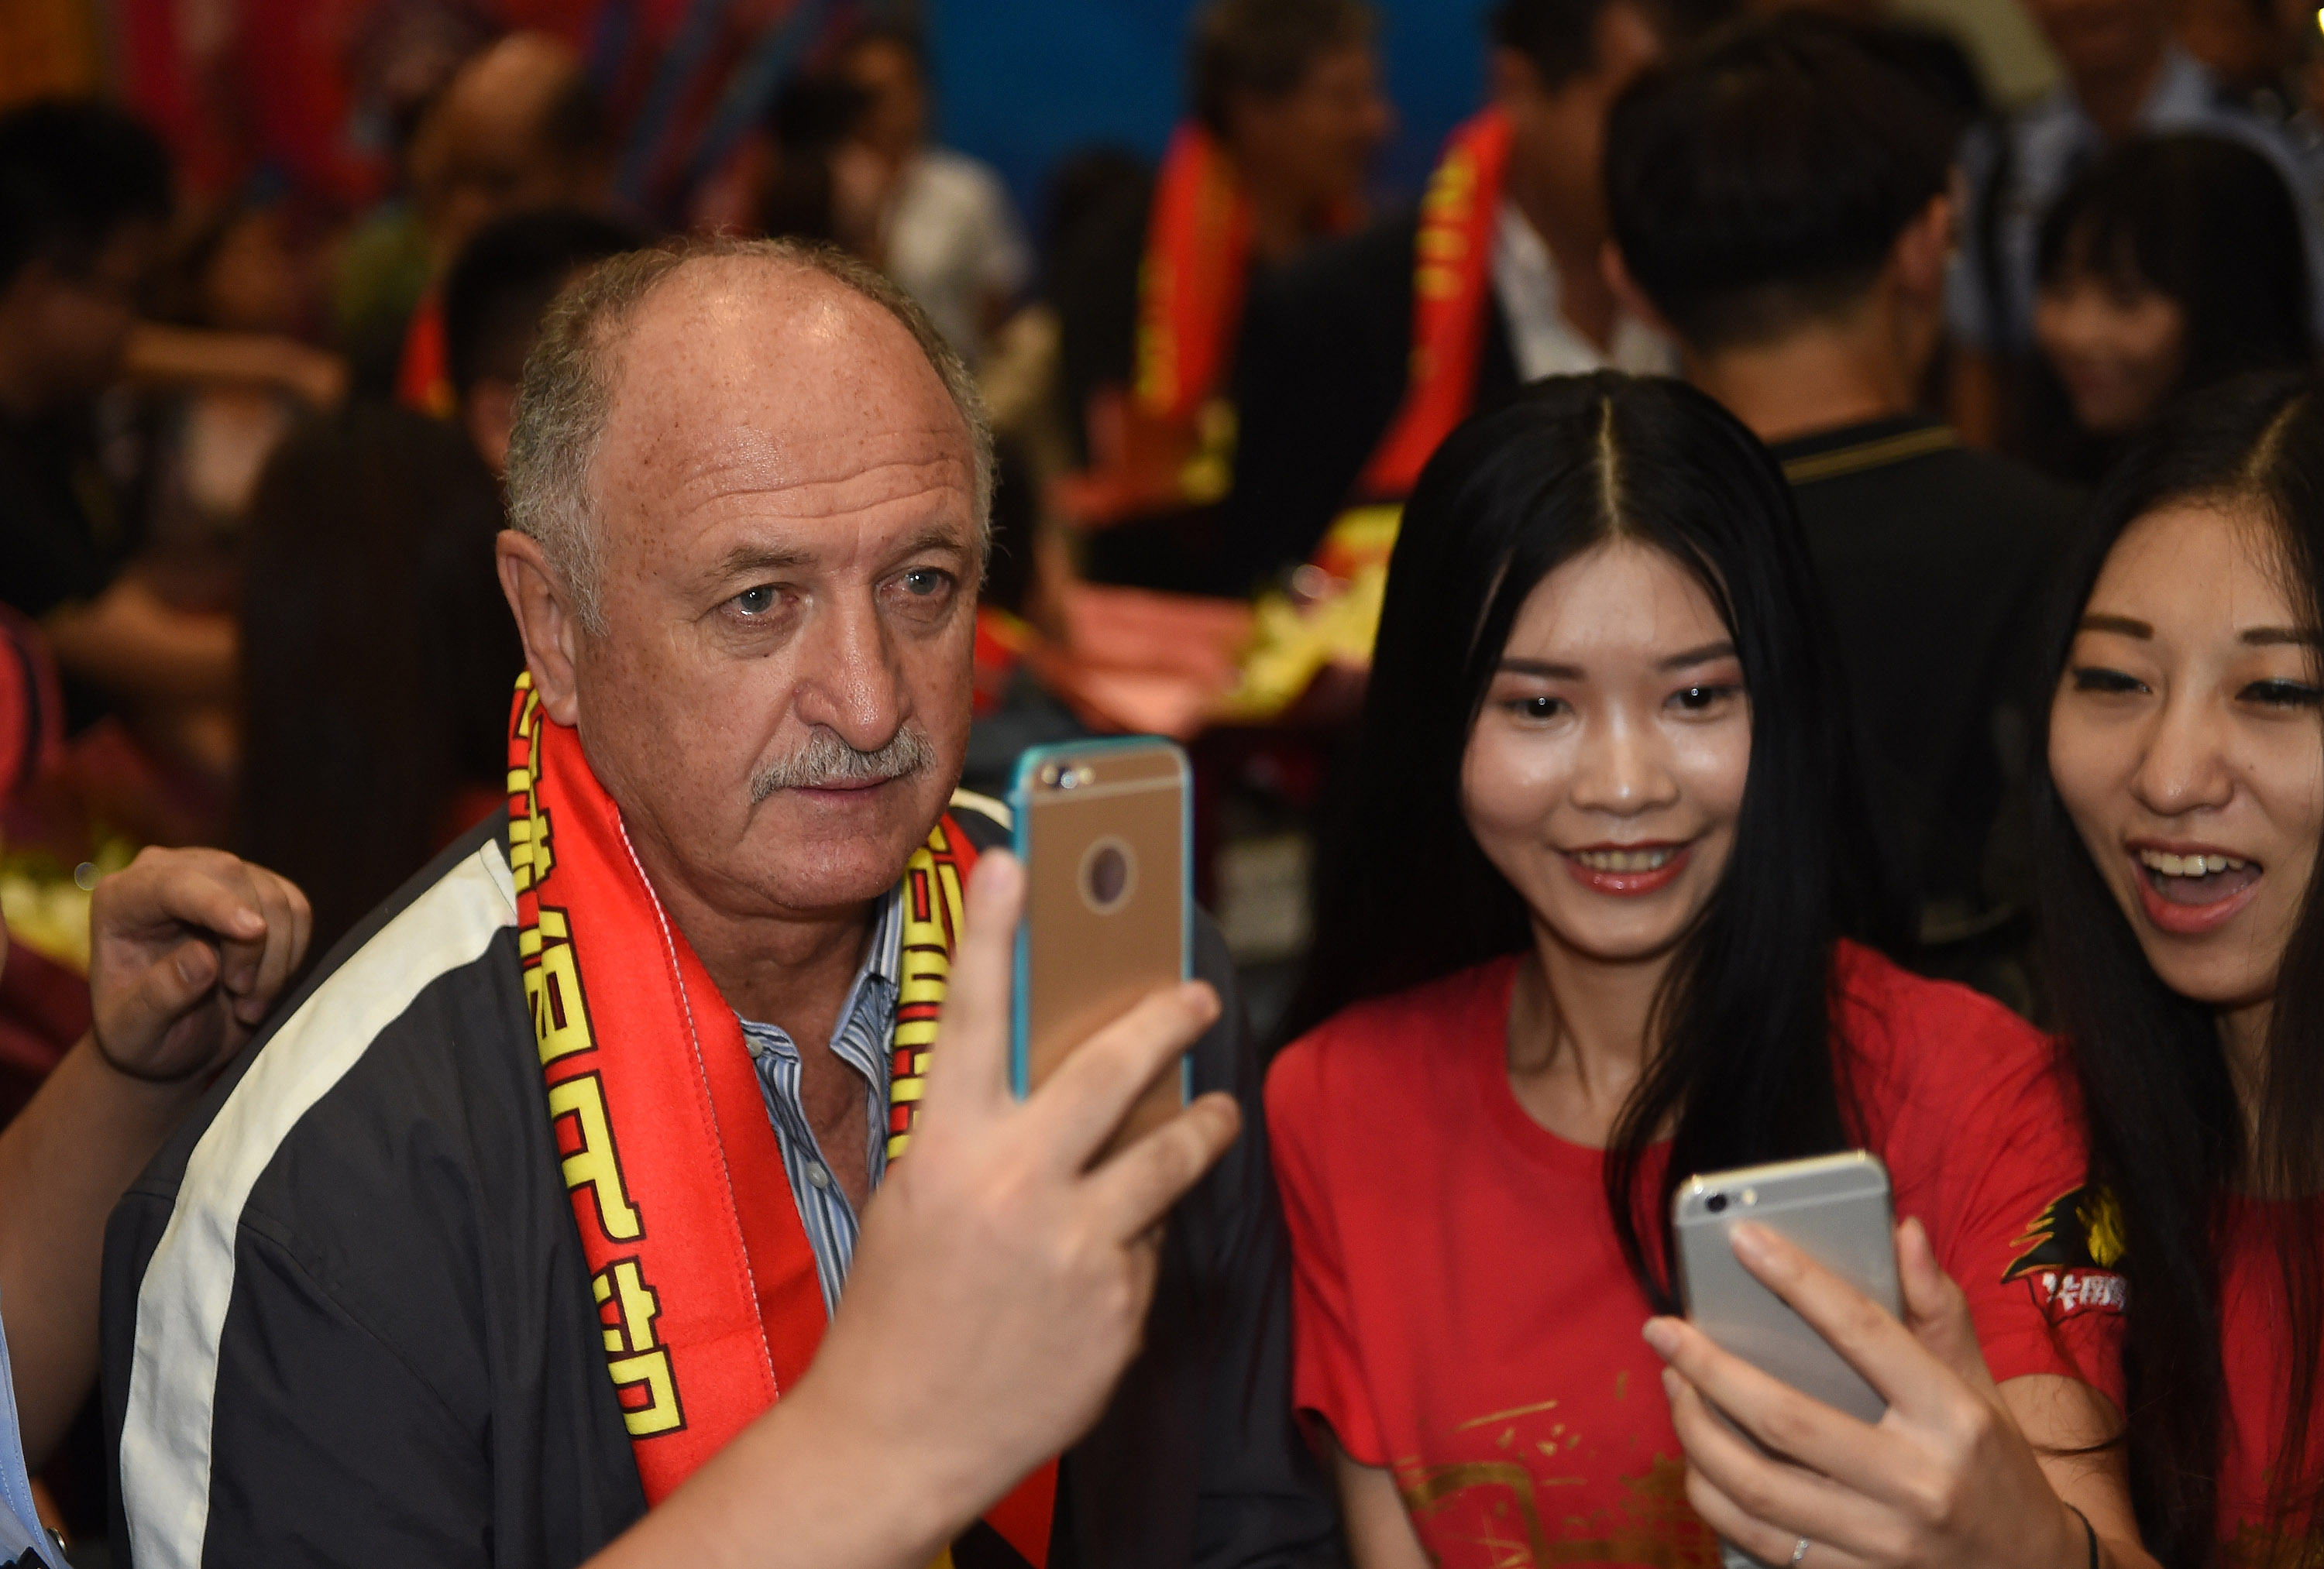 Flashback to June when Luiz Felipe Scolari joined supporters for selfies after arriving to take charge of Guangzhou Evergrande. Photo: Xinhua